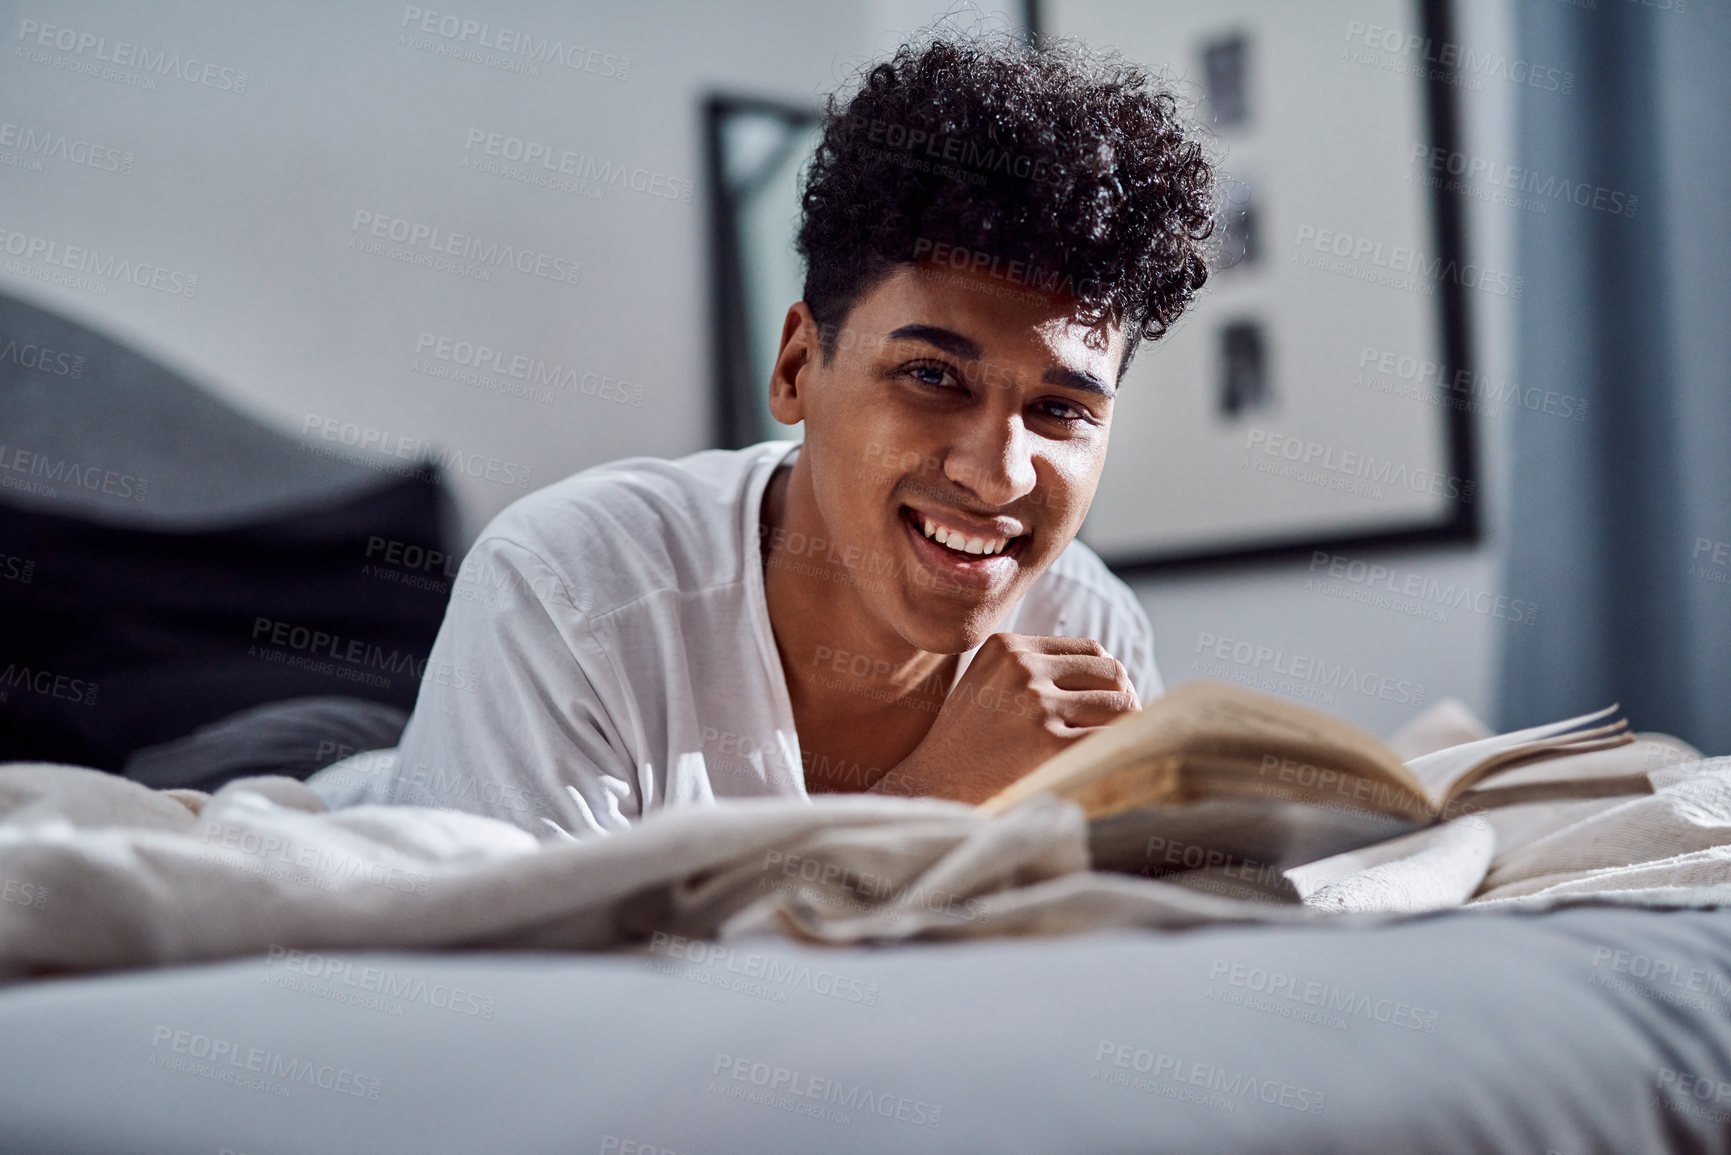 Buy stock photo Shot of a young man reading a book and relaxing on his bed at home